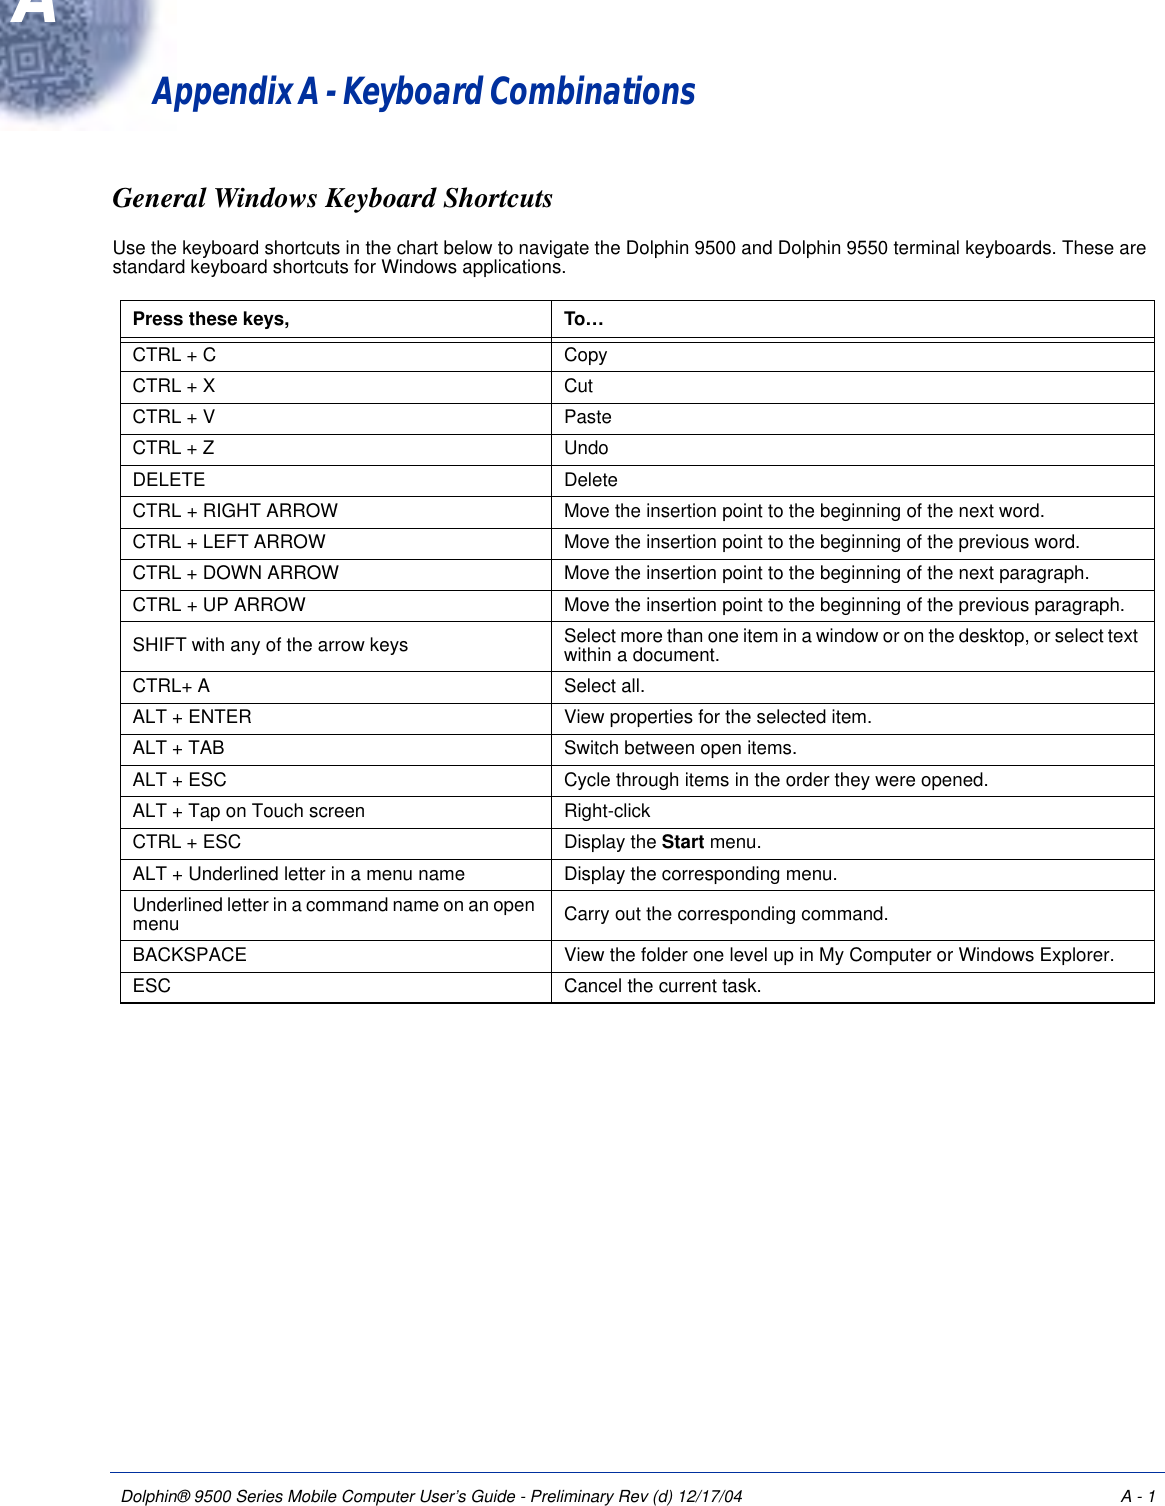 Dolphin® 9500 Series Mobile Computer User’s Guide - Preliminary Rev (d) 12/17/04 A - 1 Appendix A - Keyboard CombinationsGeneral Windows Keyboard ShortcutsUse the keyboard shortcuts in the chart below to navigate the Dolphin 9500 and Dolphin 9550 terminal keyboards. These are standard keyboard shortcuts for Windows applications.     Press these keys,  To…CTRL + C CopyCTRL + X CutCTRL + V PasteCTRL + Z UndoDELETE DeleteCTRL + RIGHT ARROW Move the insertion point to the beginning of the next word.CTRL + LEFT ARROW Move the insertion point to the beginning of the previous word.CTRL + DOWN ARROW Move the insertion point to the beginning of the next paragraph.CTRL + UP ARROW Move the insertion point to the beginning of the previous paragraph.SHIFT with any of the arrow keys Select more than one item in a window or on the desktop, or select text within a document.CTRL+ A Select all.ALT + ENTER View properties for the selected item.ALT + TAB Switch between open items.ALT + ESC Cycle through items in the order they were opened.ALT + Tap on Touch screen Right-clickCTRL + ESC Display the Start menu.ALT + Underlined letter in a menu name Display the corresponding menu.Underlined letter in a command name on an open menu Carry out the corresponding command.BACKSPACE View the folder one level up in My Computer or Windows Explorer.ESC Cancel the current task.A